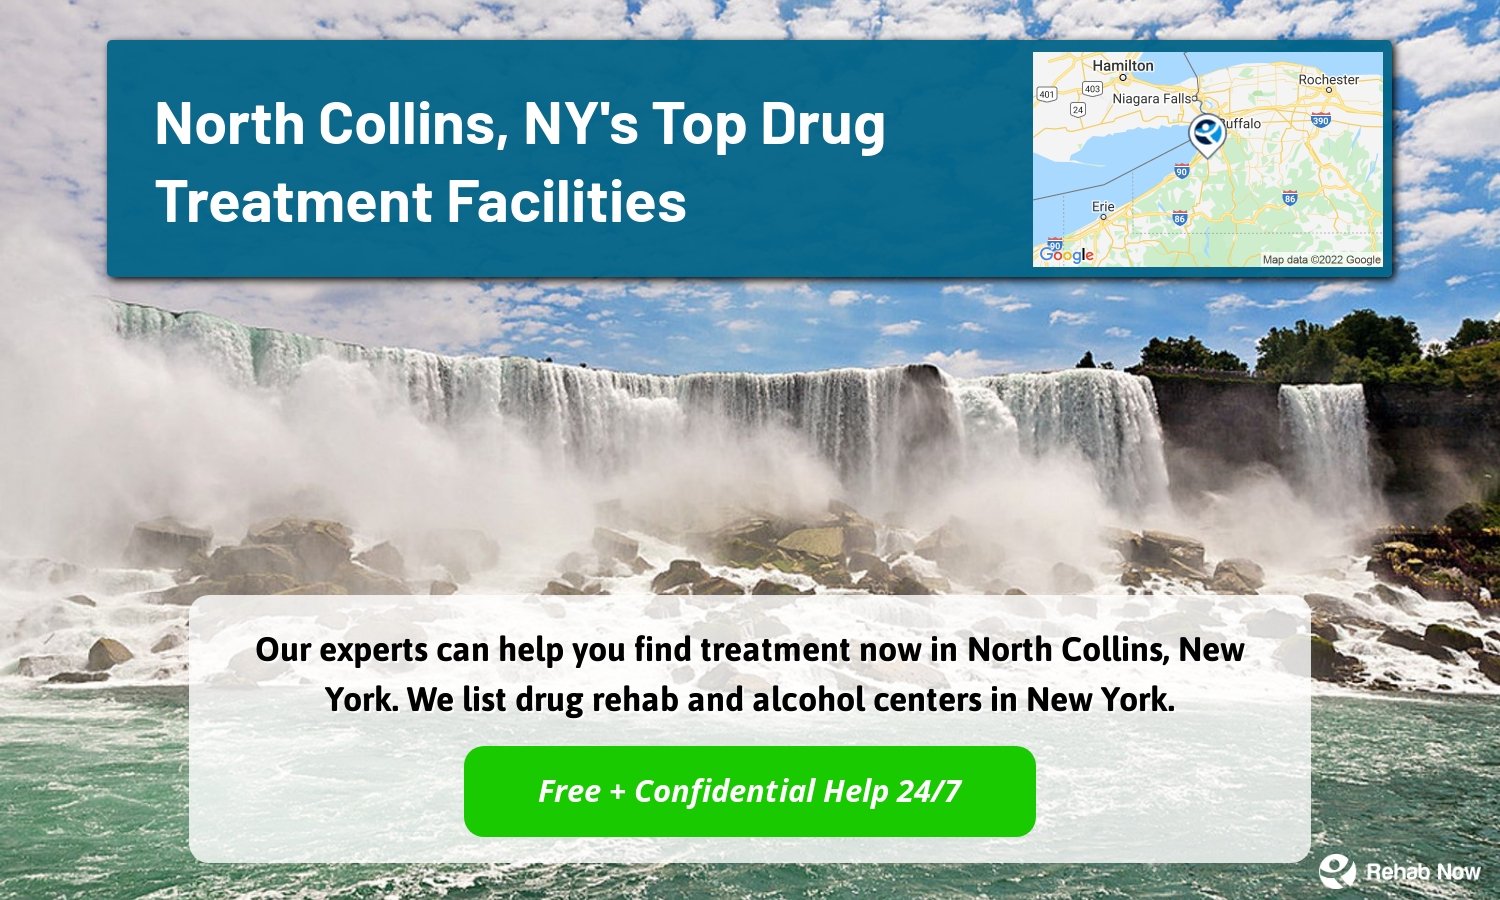 Our experts can help you find treatment now in North Collins, New York. We list drug rehab and alcohol centers in New York.